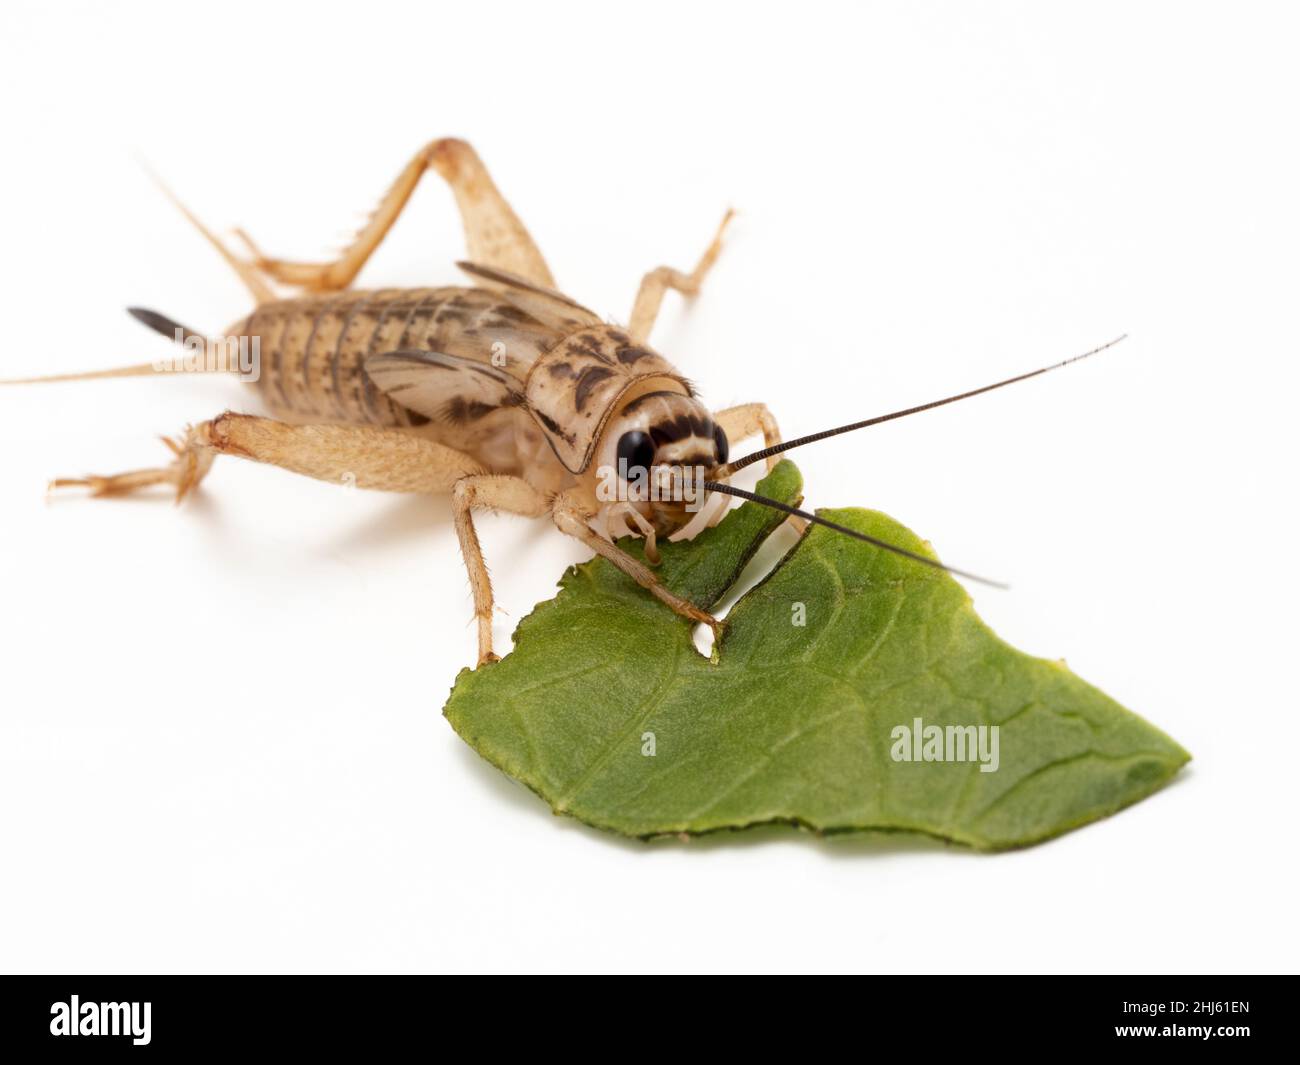 Subadult house cricket (Acheta domesticus) feeding on a piece of lettuce leaf. Isolated. This species is a standard feeder insect for the pet and rese Stock Photo